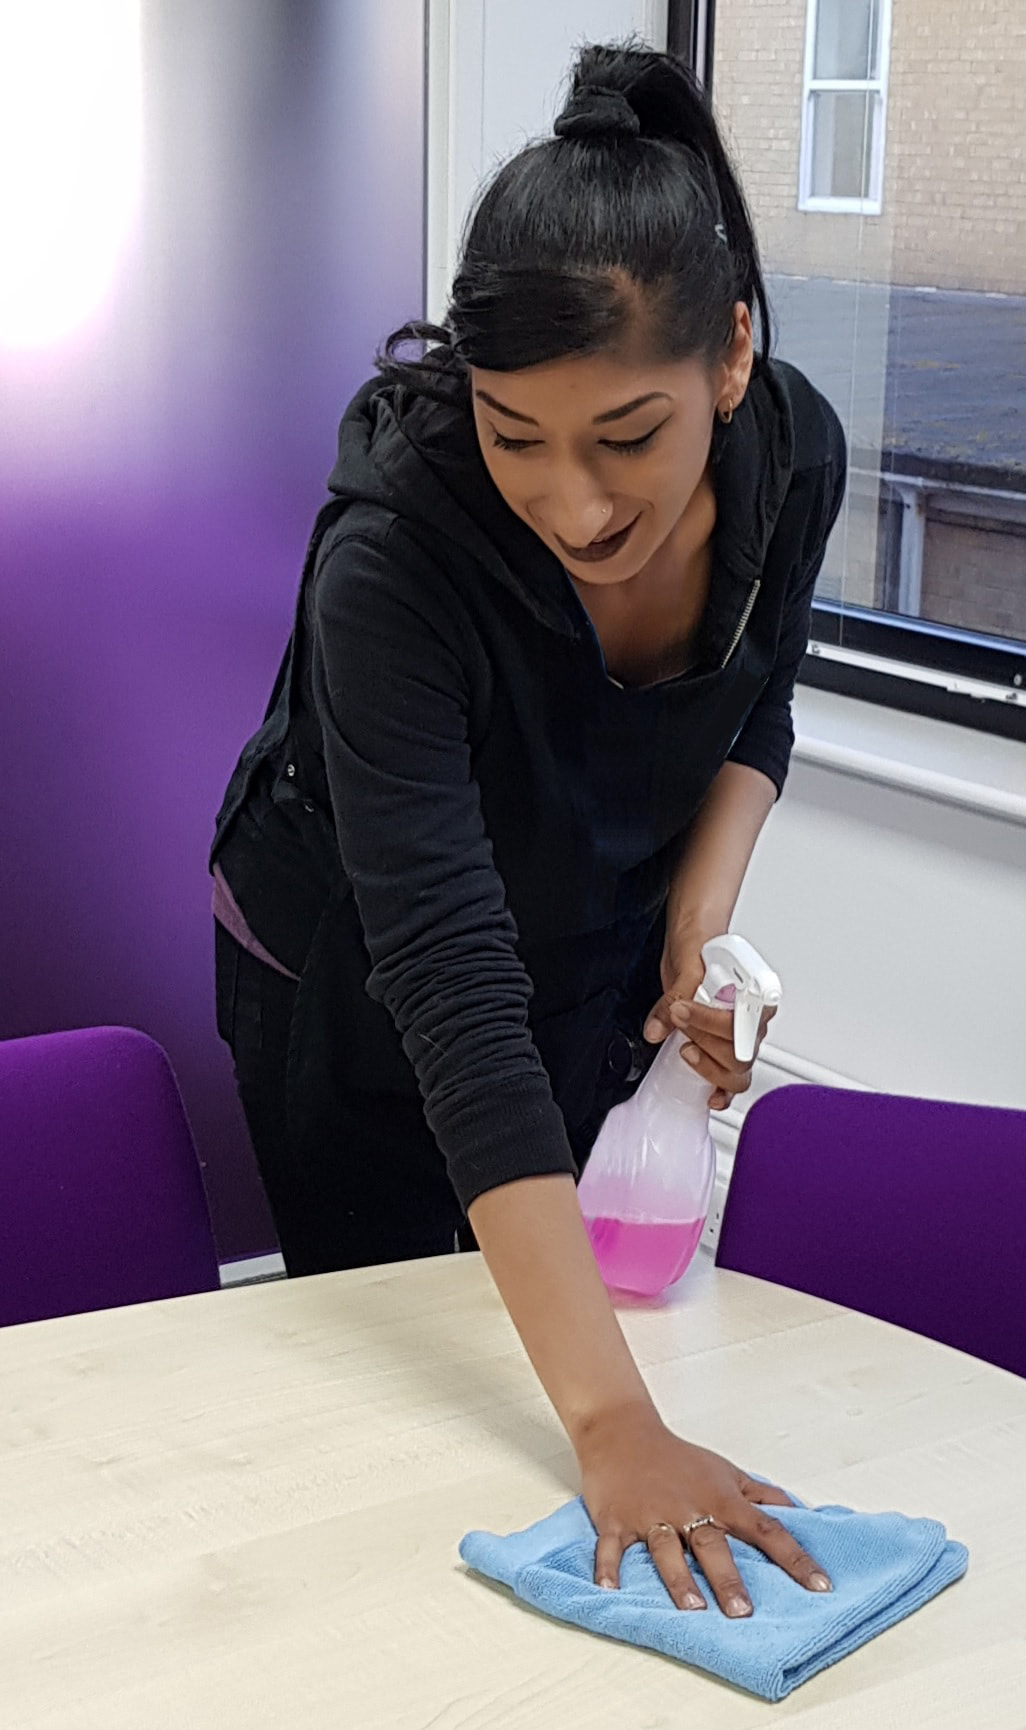 Our fully insured office cleaners are trained with an emphasis on professionalism and courtesy, in addition to great office cleaning skills and they always look to comply with the most recent health and safety legislation, for your peace of mind.

Benefit from our non-intrusive and convenient Chessington office cleaning services which will bring you value for your money, reliable and professional staff, and a consistent and high quality service - all from a family owned business with strong values and a history in your community.

Get in touch with us today for more details about our Chessington office cleaners.